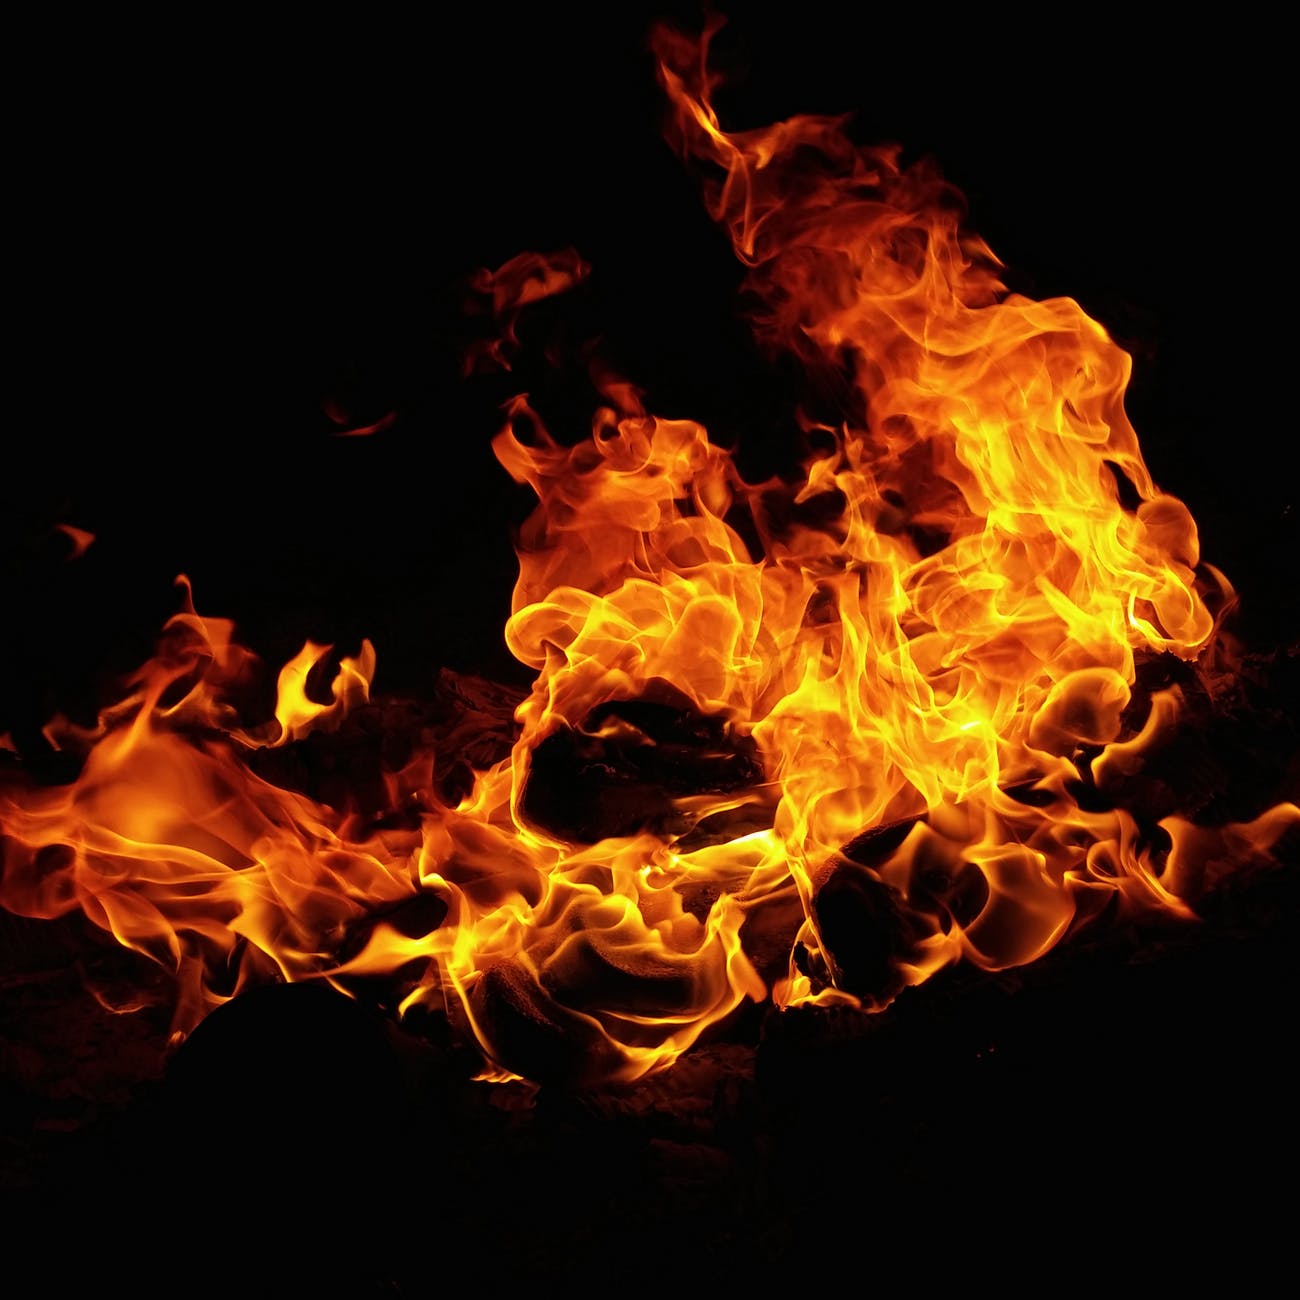 photograph of a burning fire